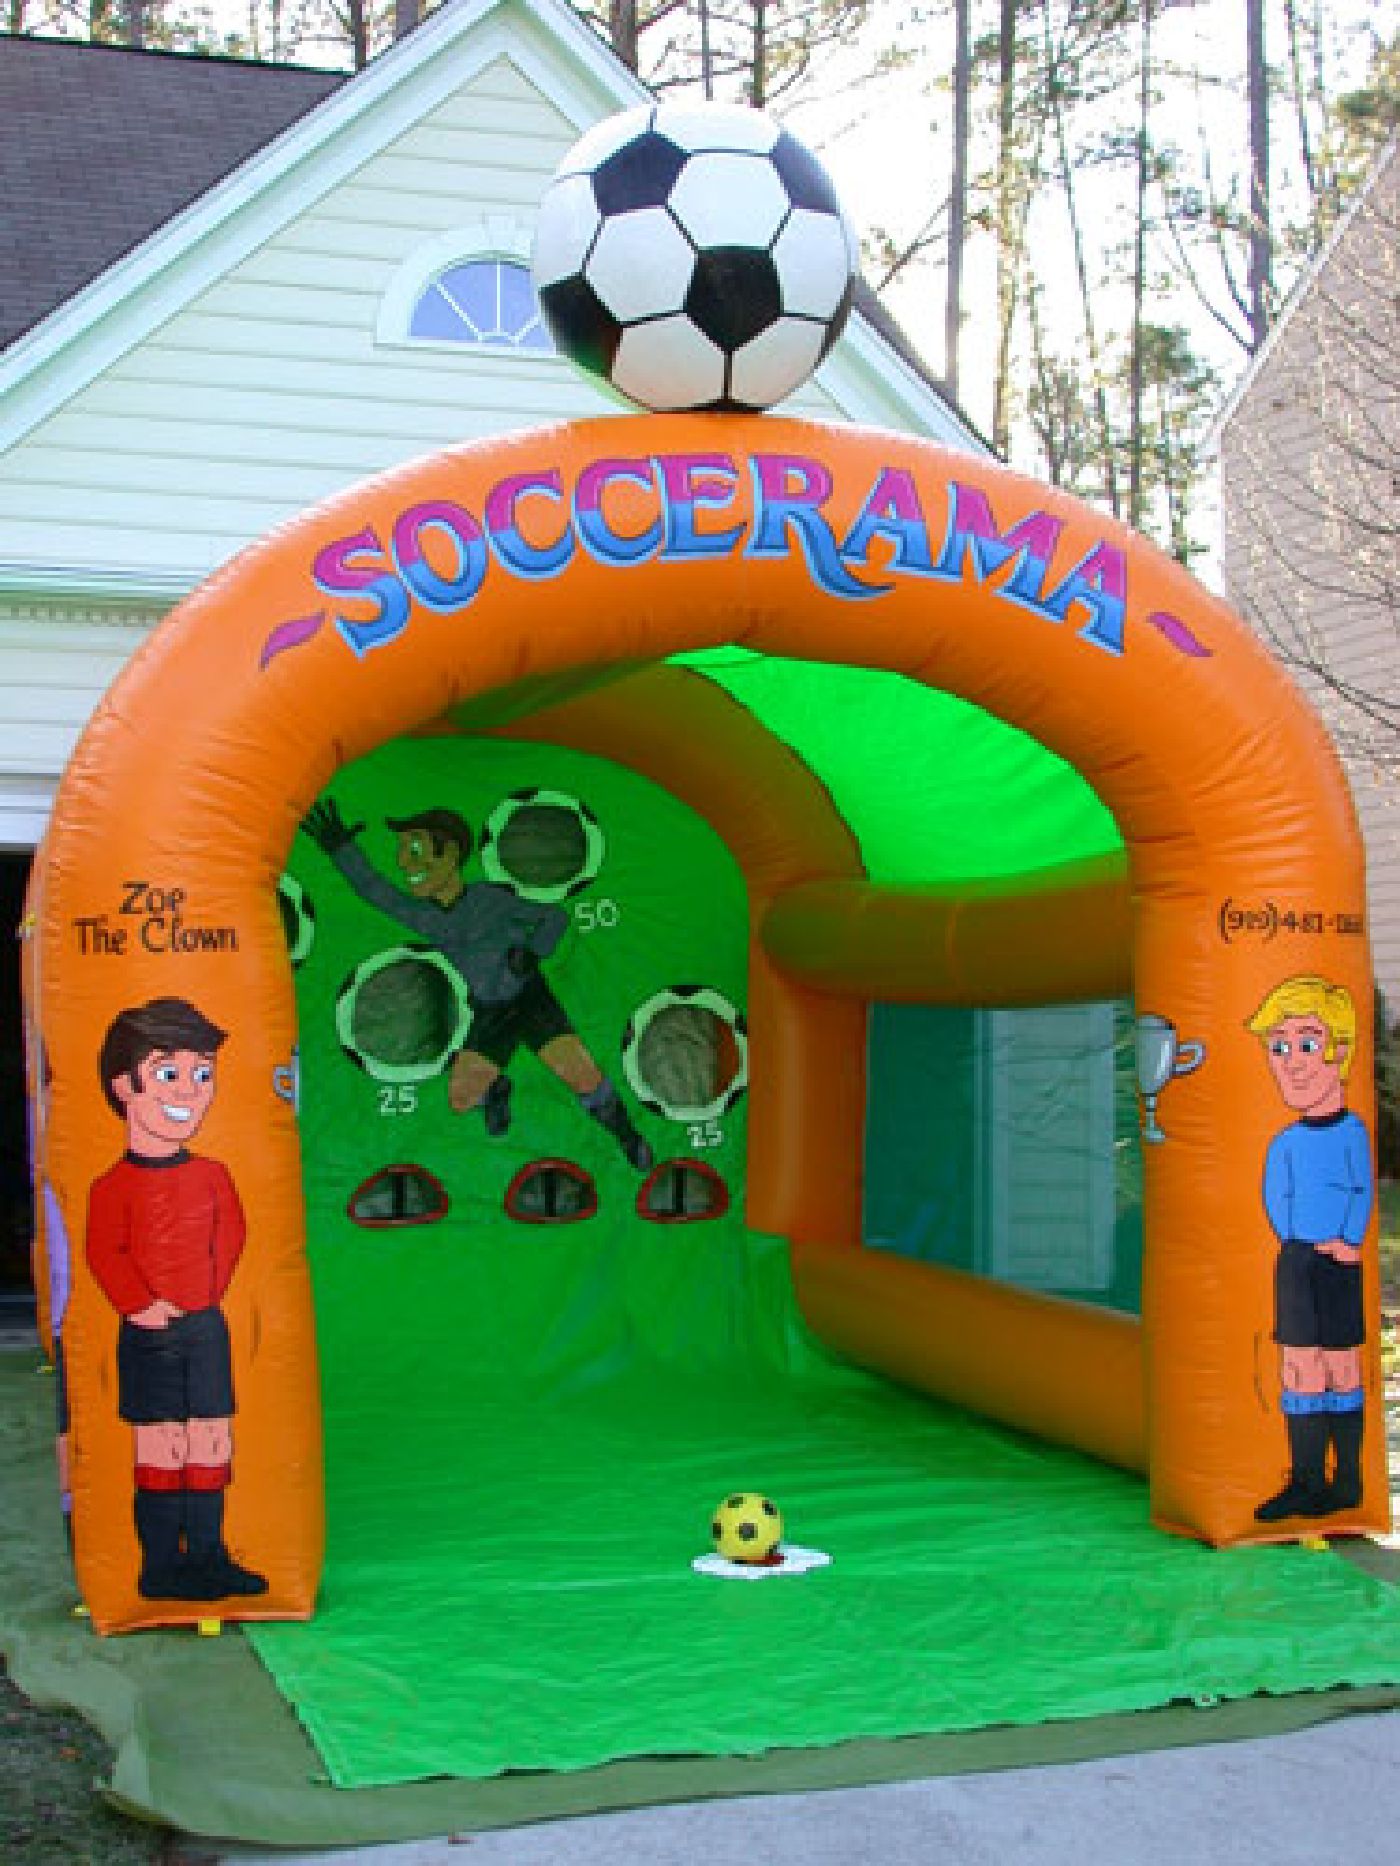 Soccerama soccer rental game ready for the first strike in Cary, NC